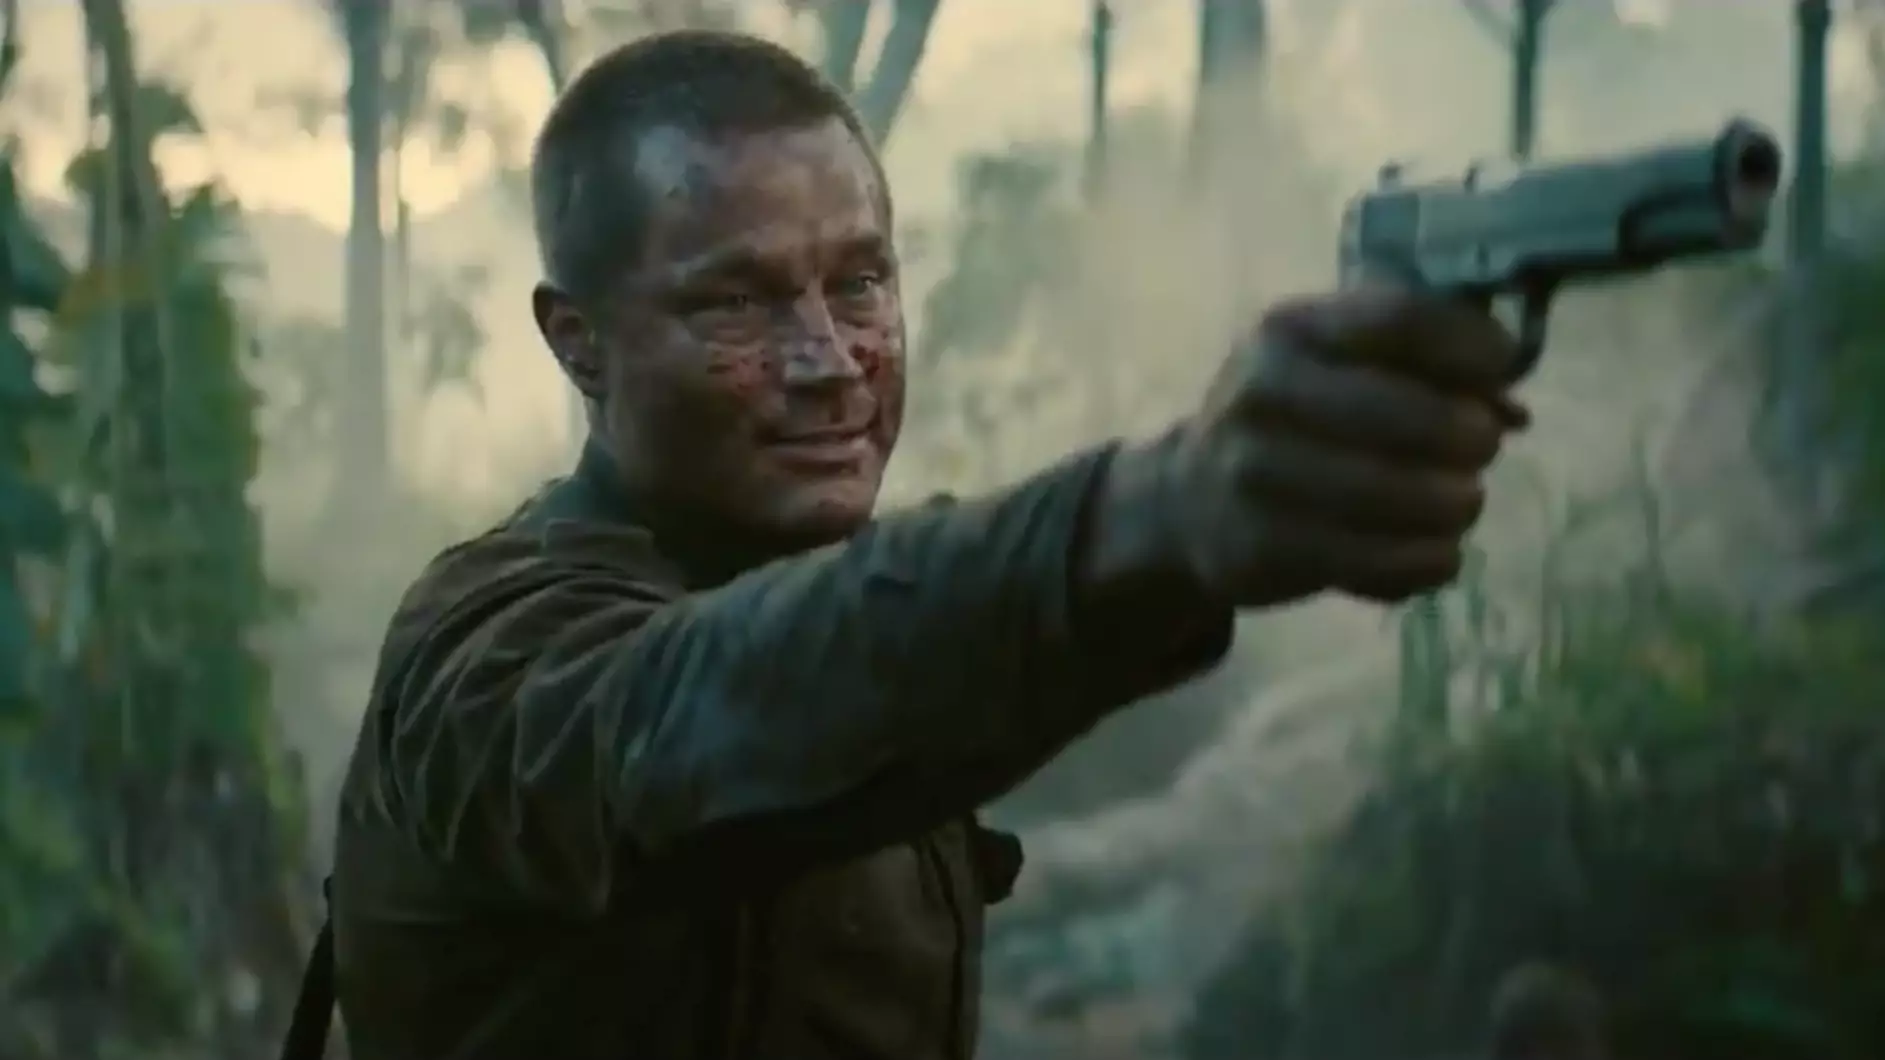 Trailer For Aussie War Movie About The Battle Of Long Tan Looks Epic